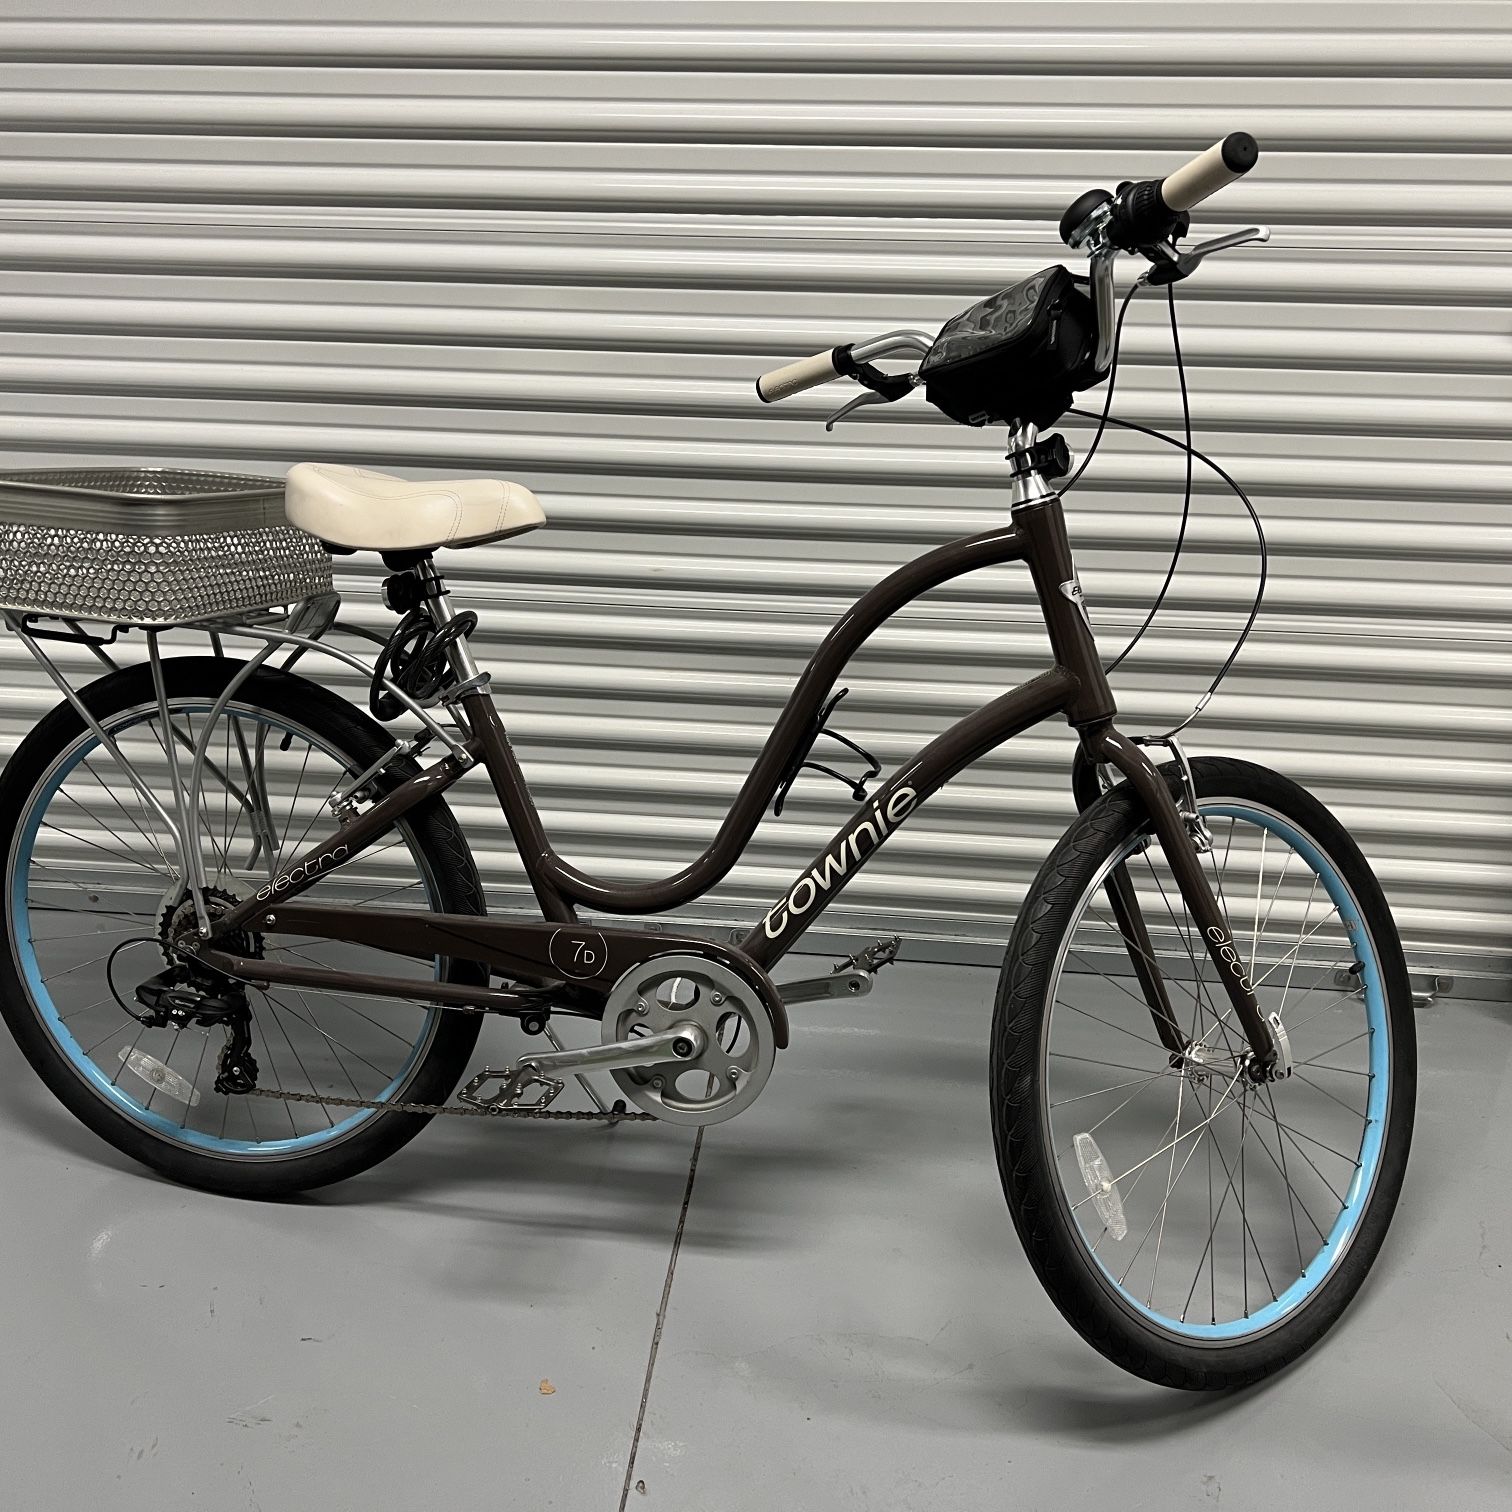 Townie 7D bike with extras